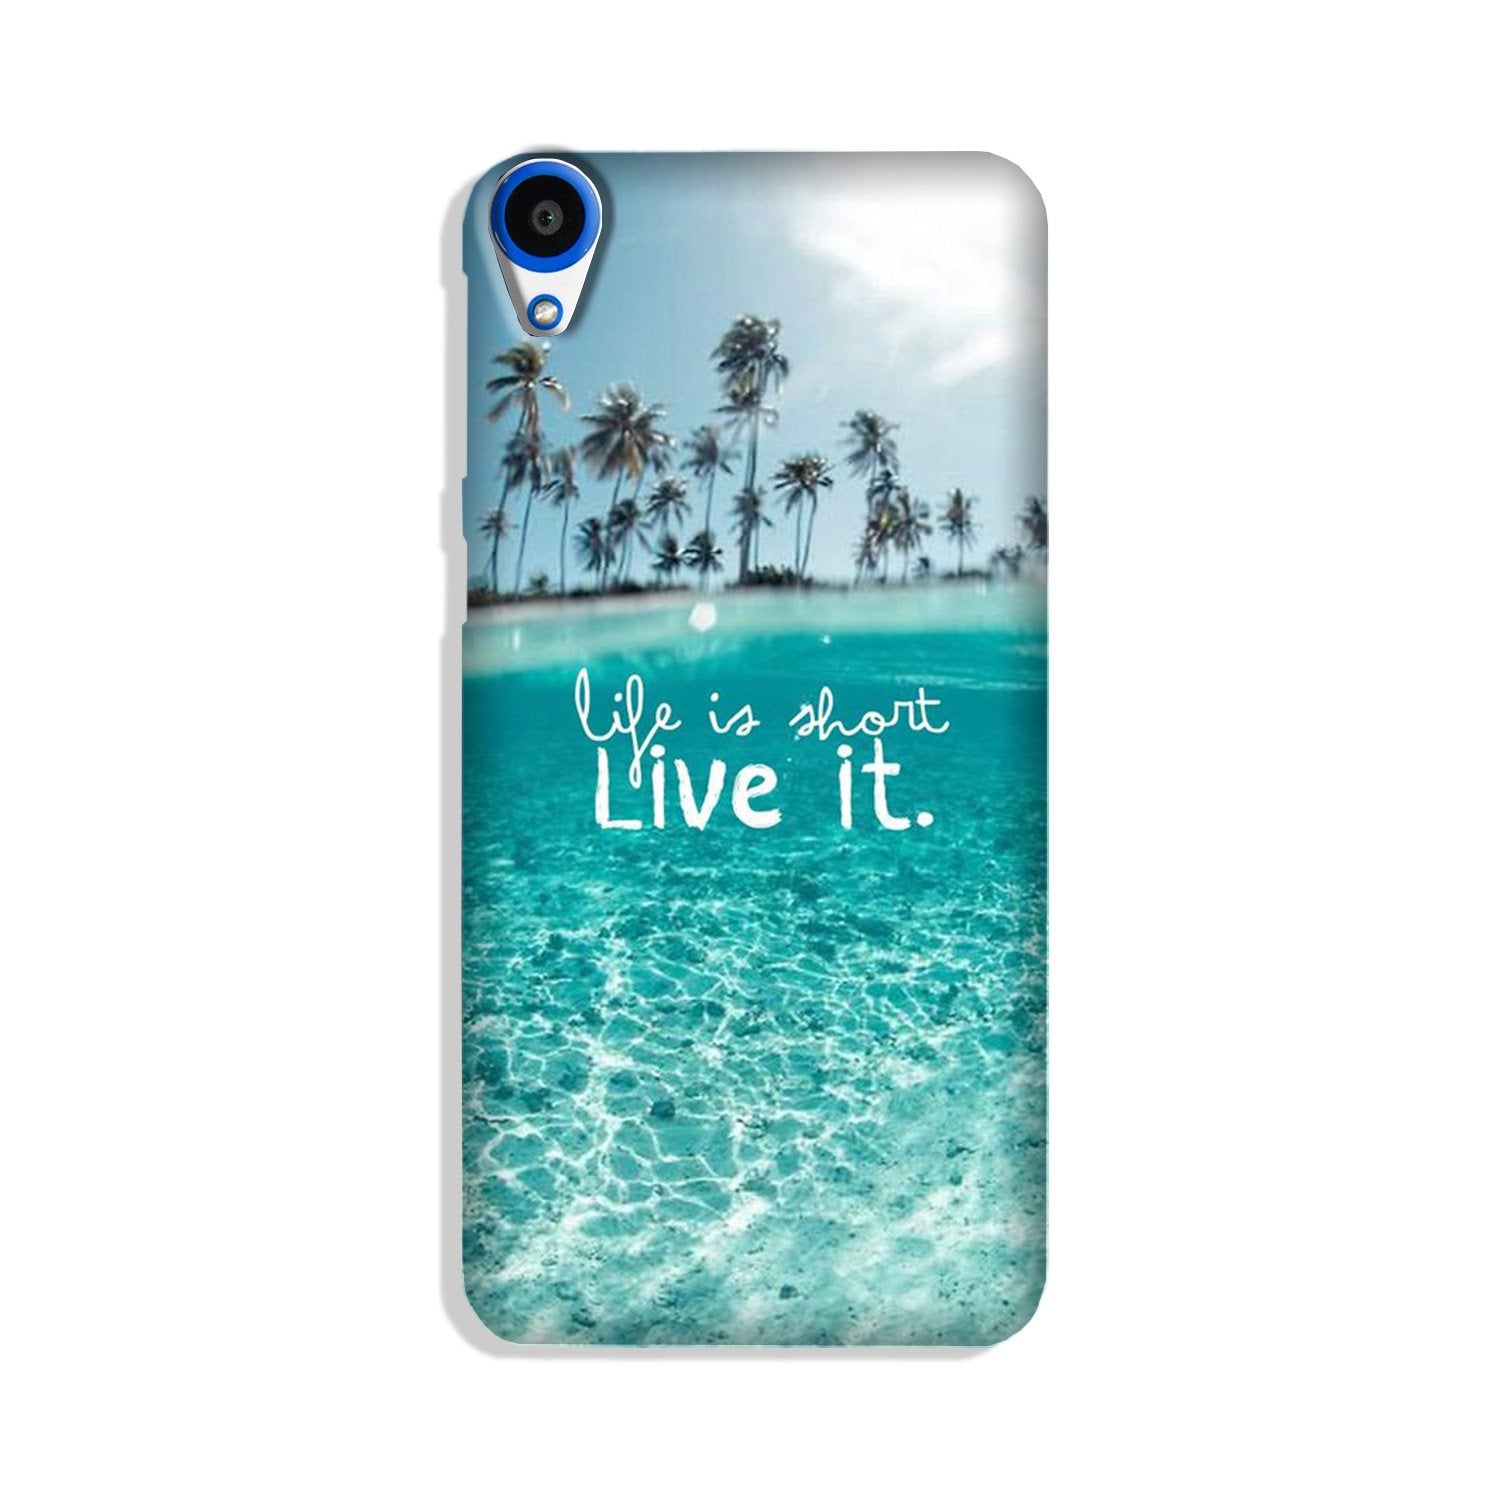 Life is short live it Case for HTC Desire 820